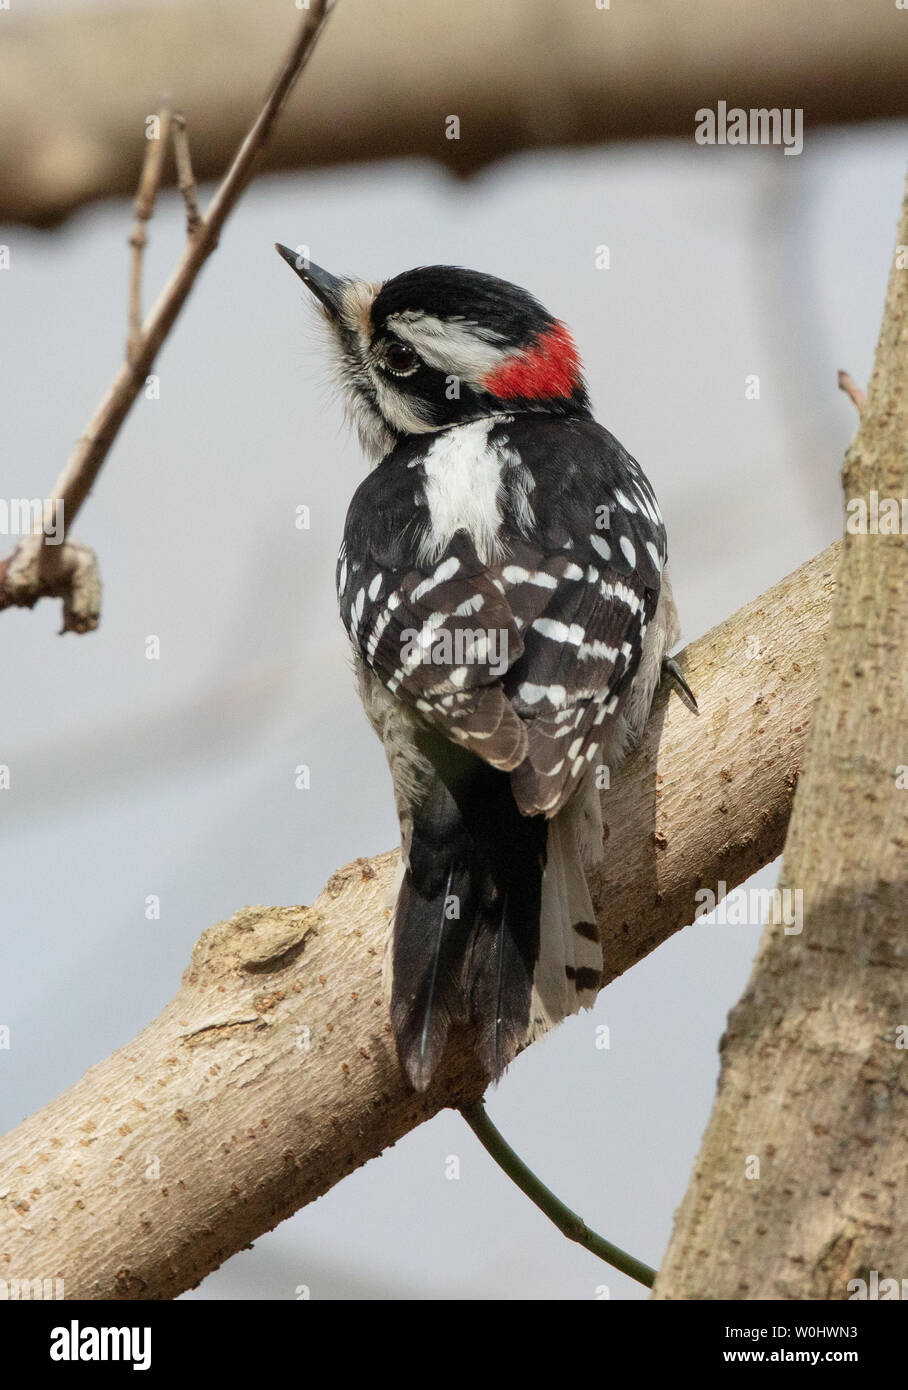 A male downy woodpecker (Dryobates pubescens) looks away from a tree branch Stock Photo